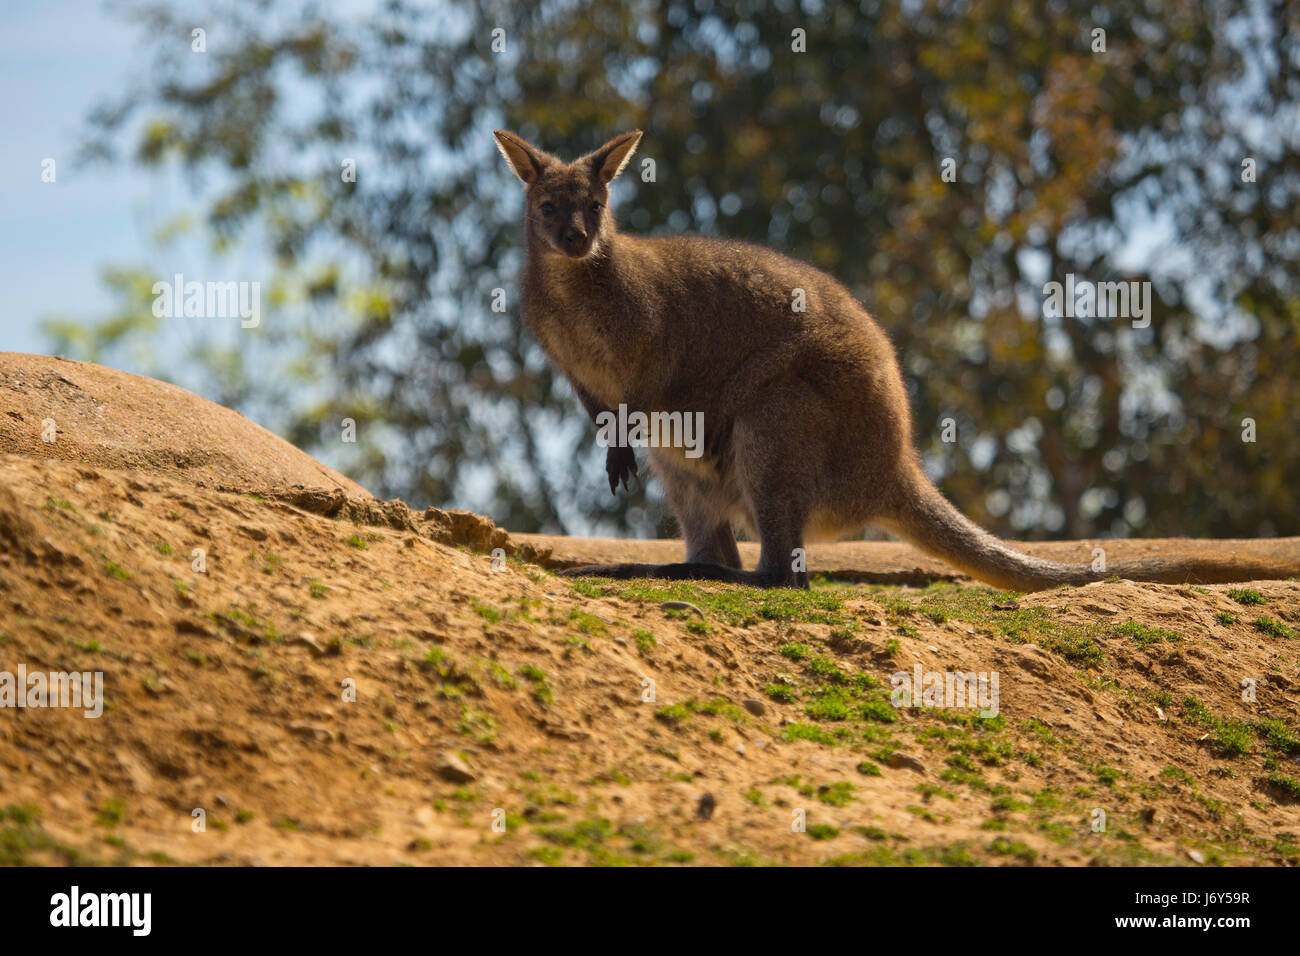 An australian wallaby sitting on a rock with trees in the background Stock Photo